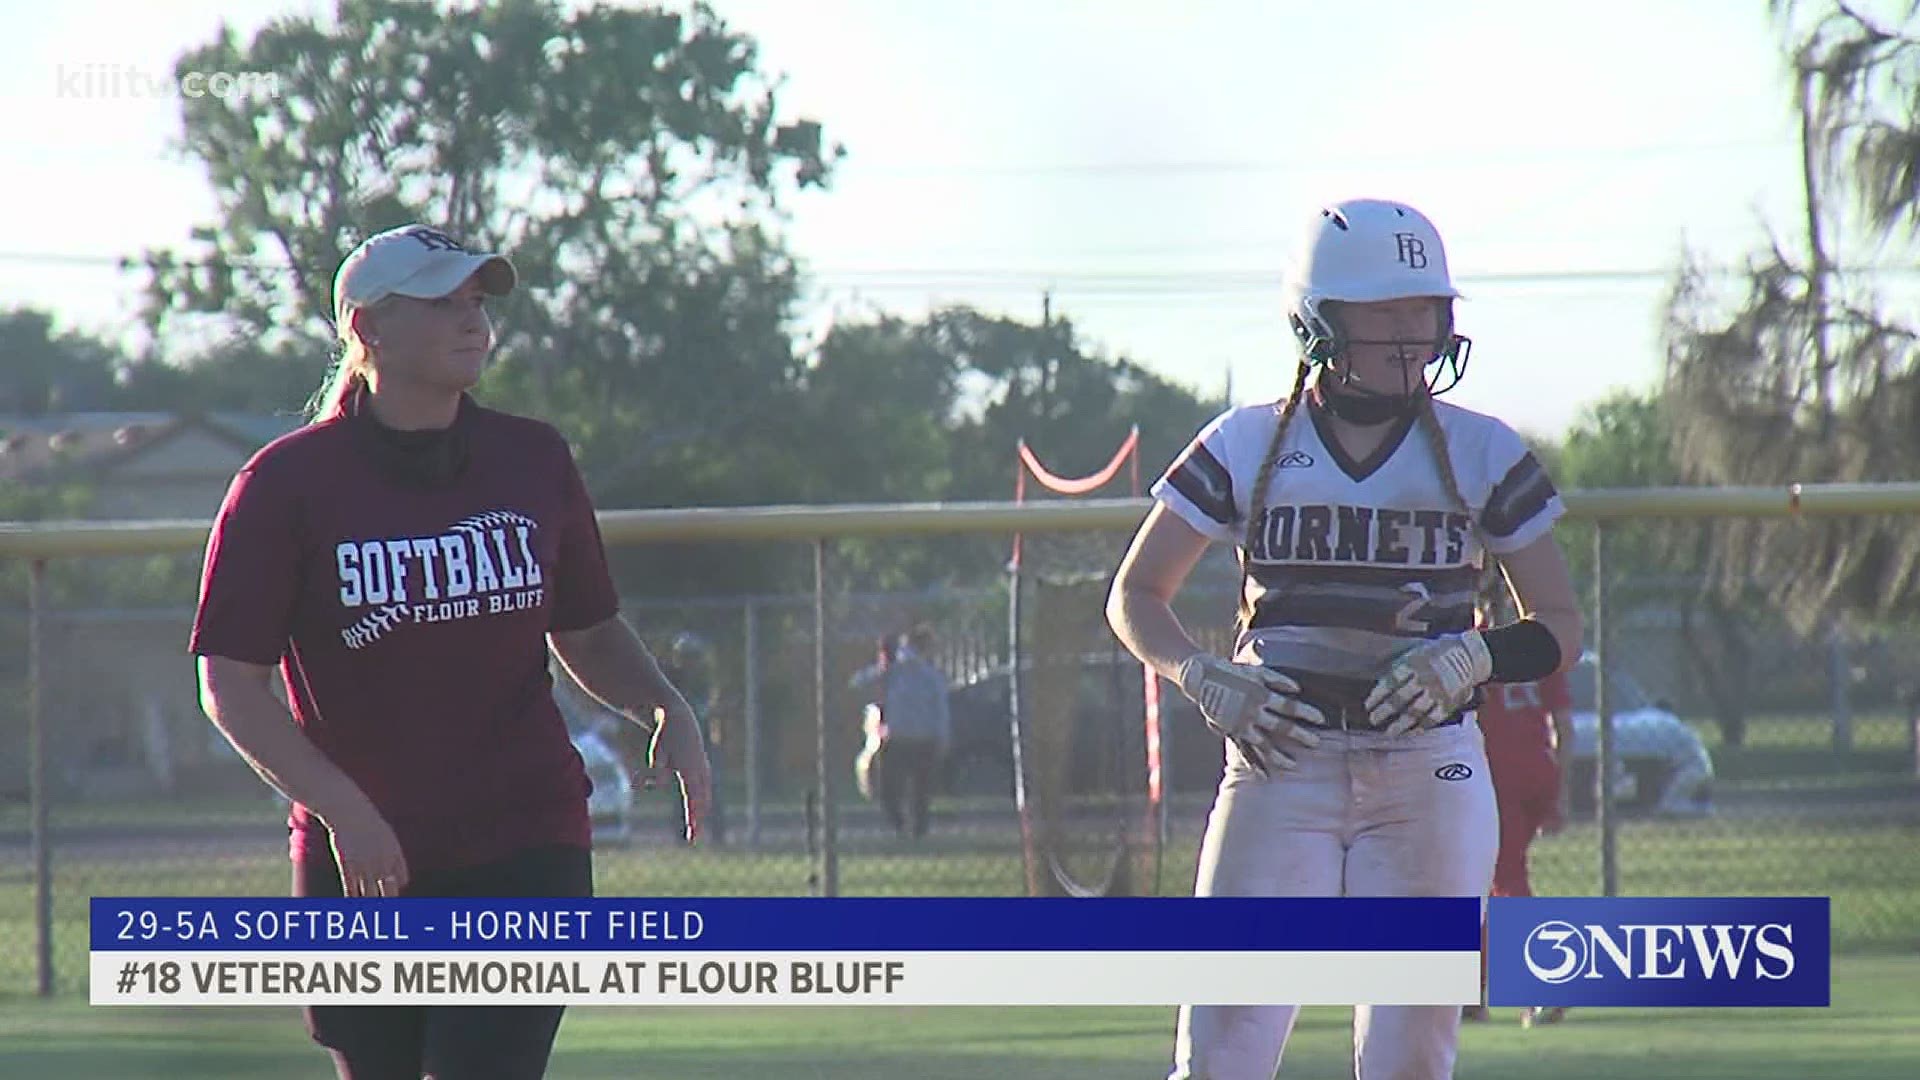 FB's softball team clinched a playoff spot with the 6-3 win over Veterans Memorial while the baseball team edged Moody 4-3 Tuesday at Hornet Field.